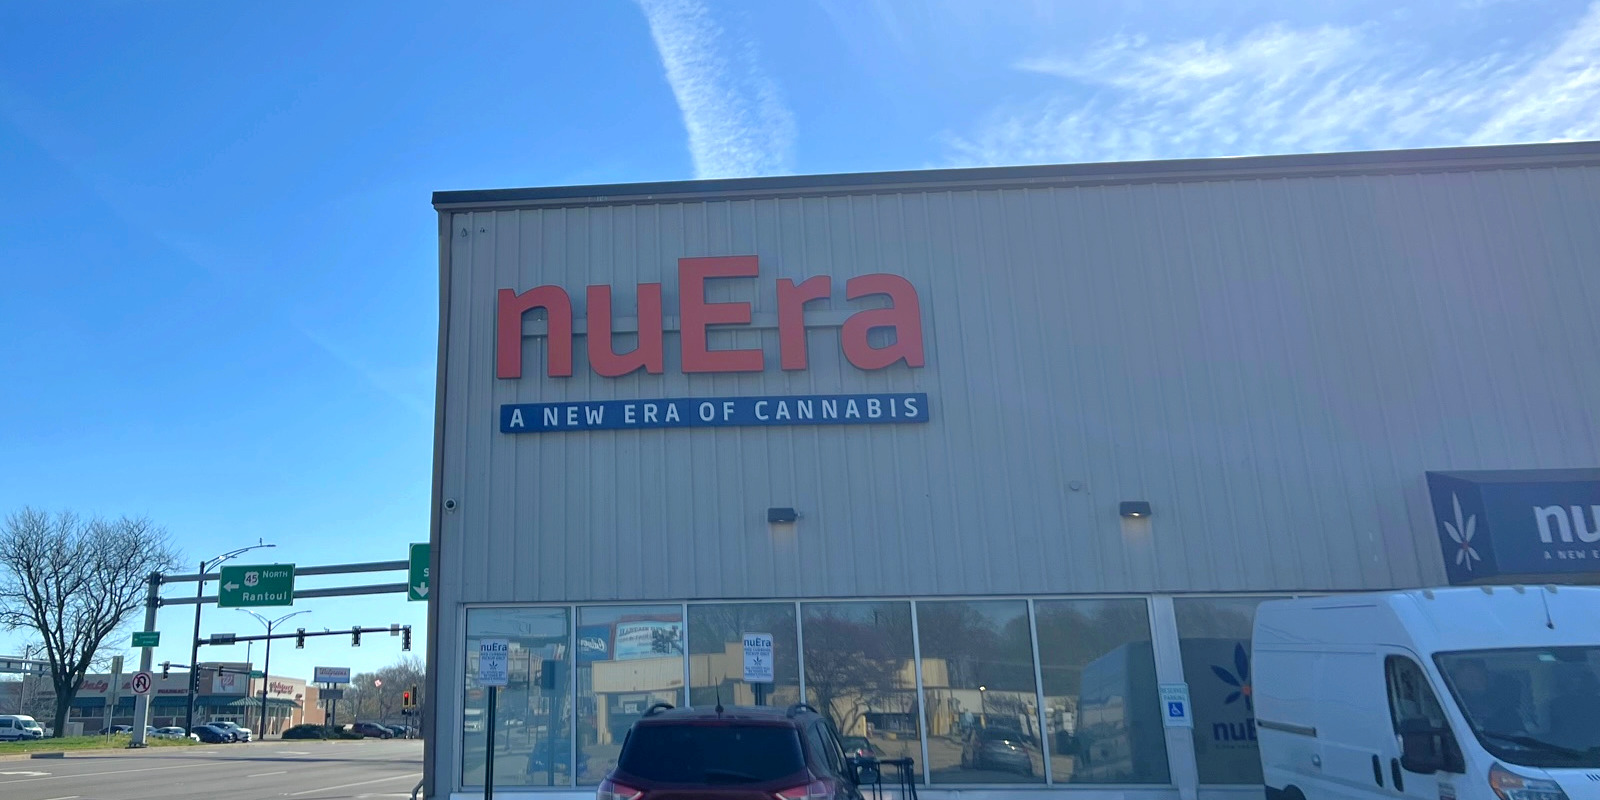 Outside of nuEra Urbana on a sunny day. Photo by Alyssa Buckley.